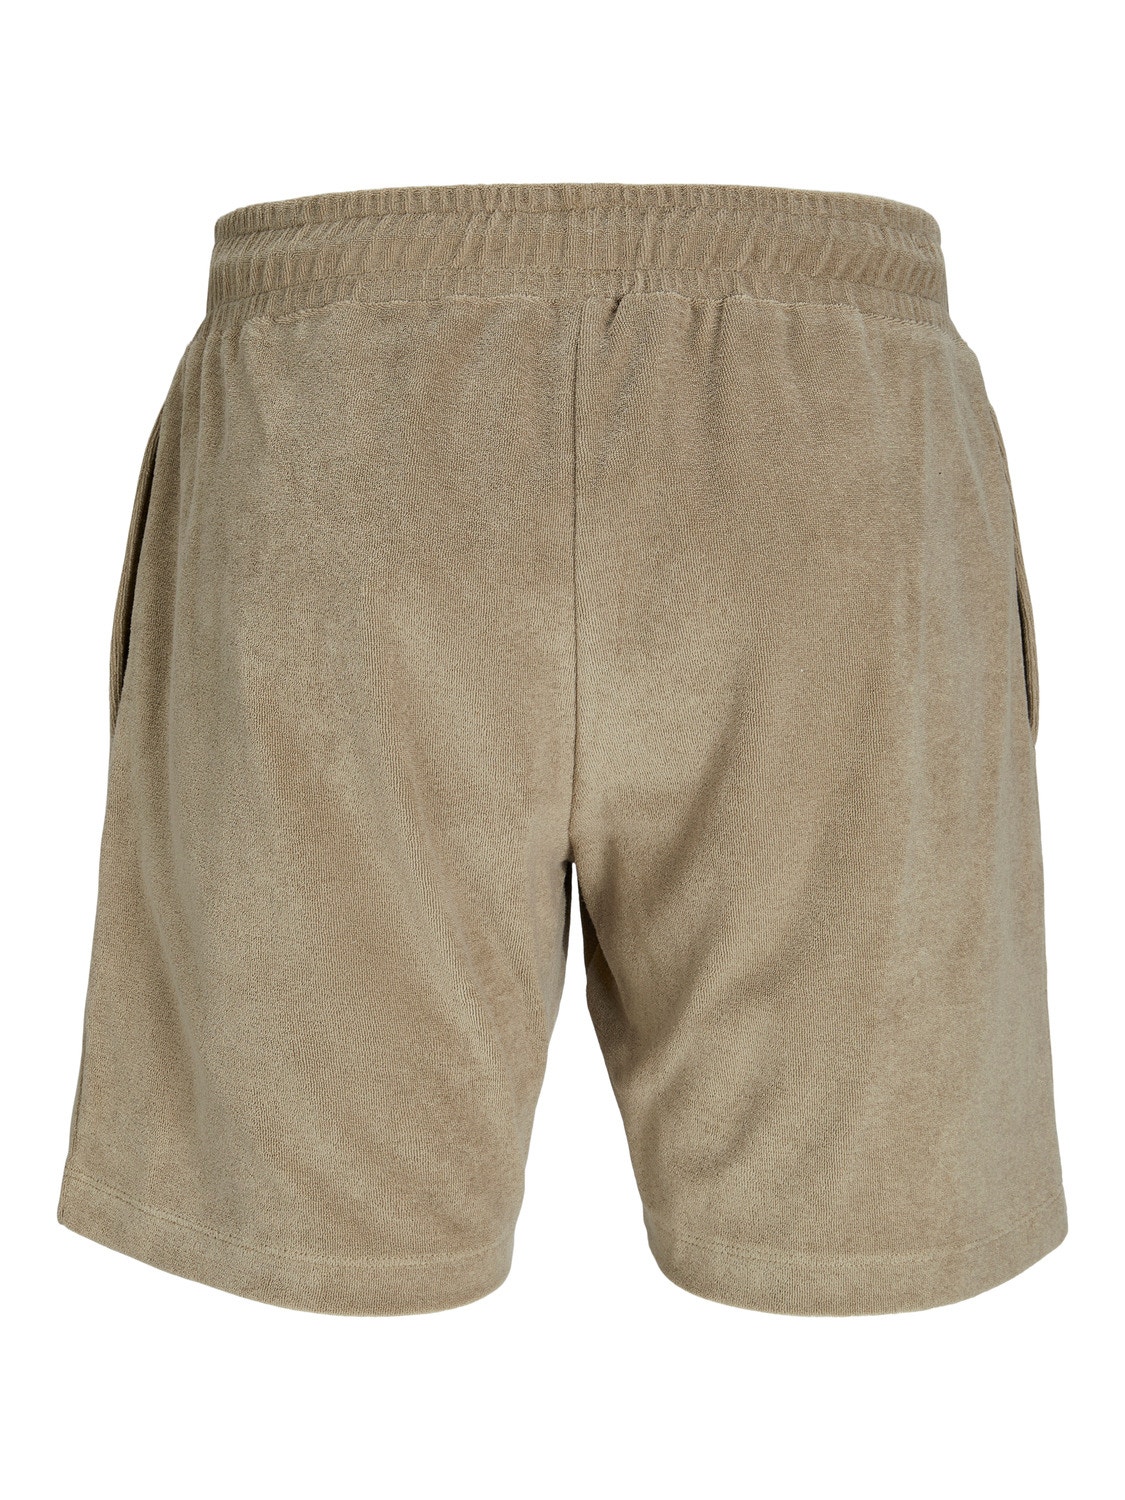 Jack & Jones Relaxed Fit Sweat-Shorts -Timber Wolf  - 12236582